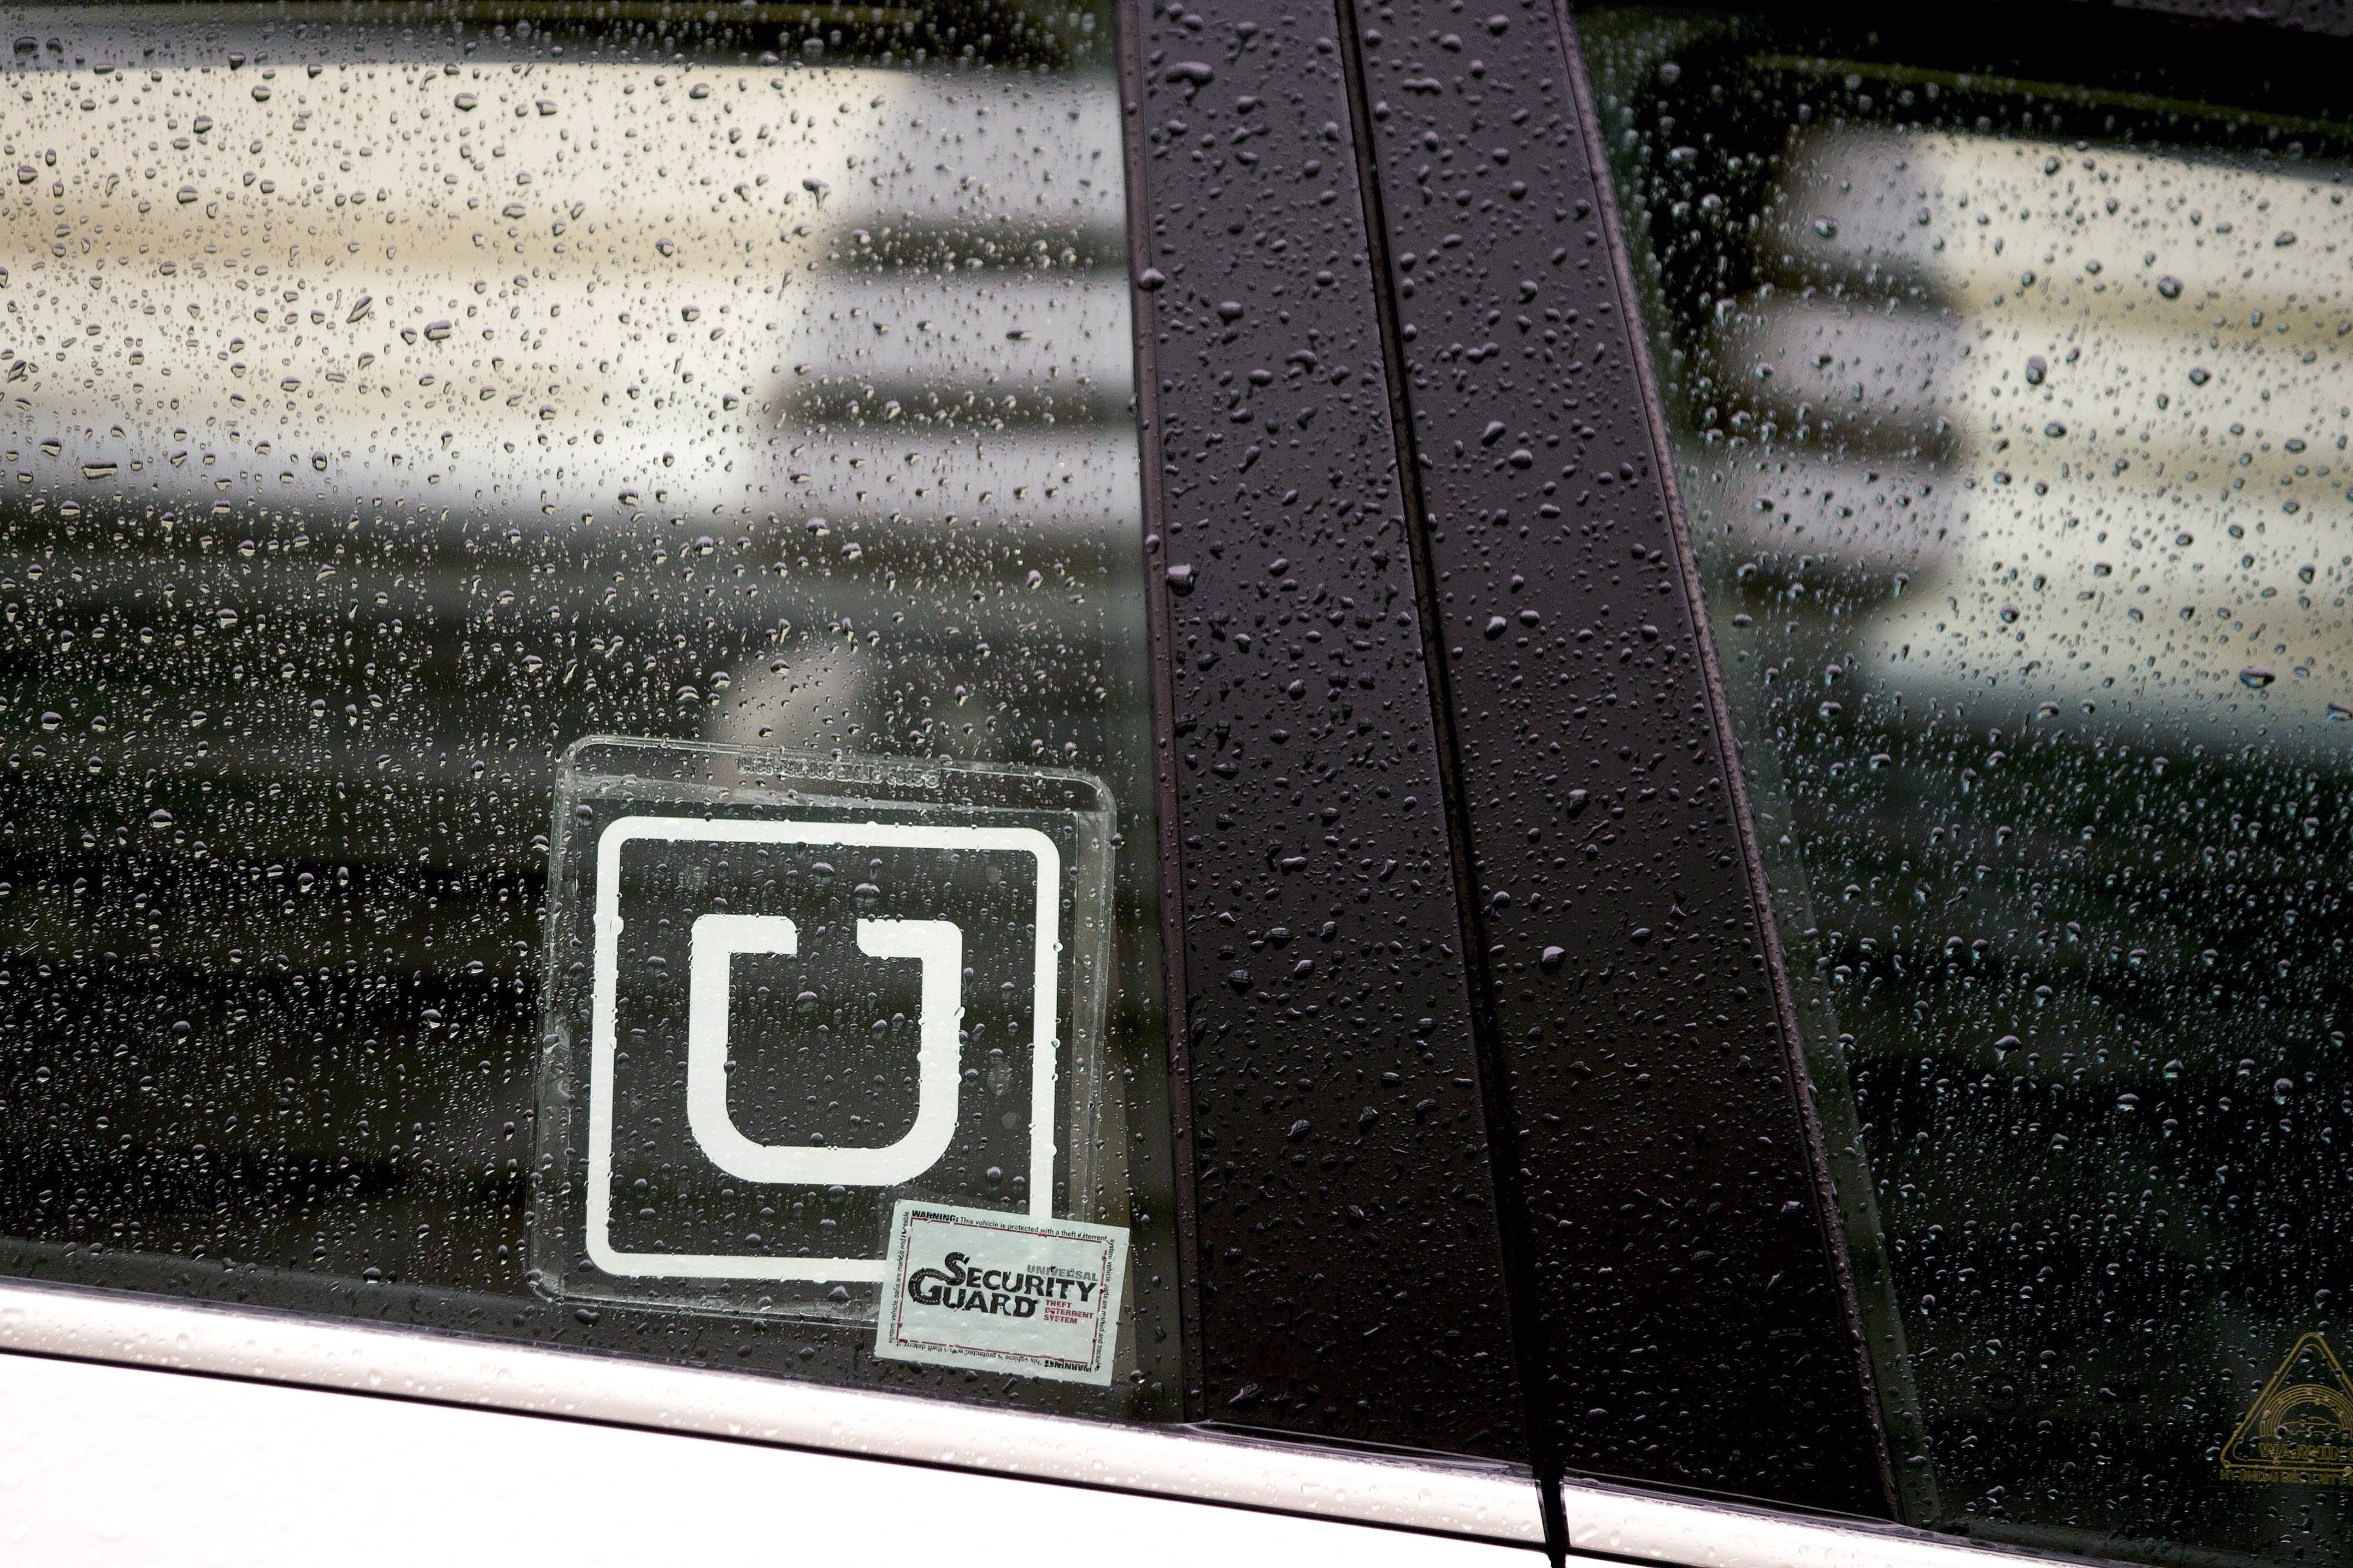 The Uber Technologies Inc. logo is displayed on the window of a vehicle after dropping off a passenger at Ronald Reagan National Airport (DCA) in Washington on Nov. 26, 2014. (Bloomberg/Getty Images)